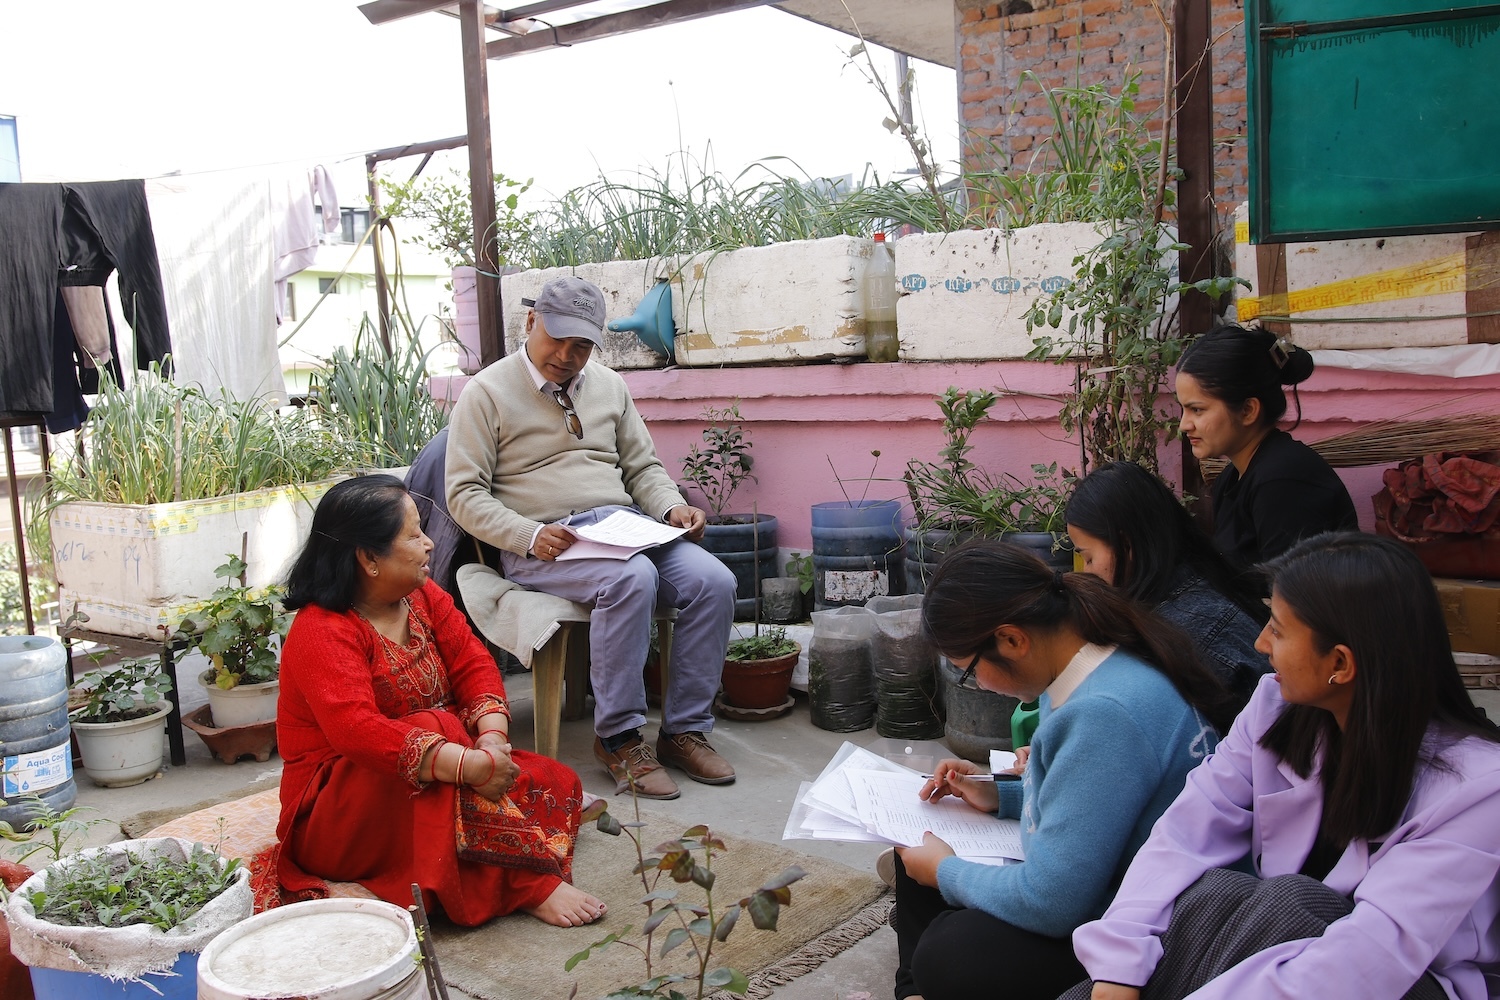 A group of people, including an elderly man and a woman and four younger women, sitting outdoors having a discussion with notebooks on their laps.